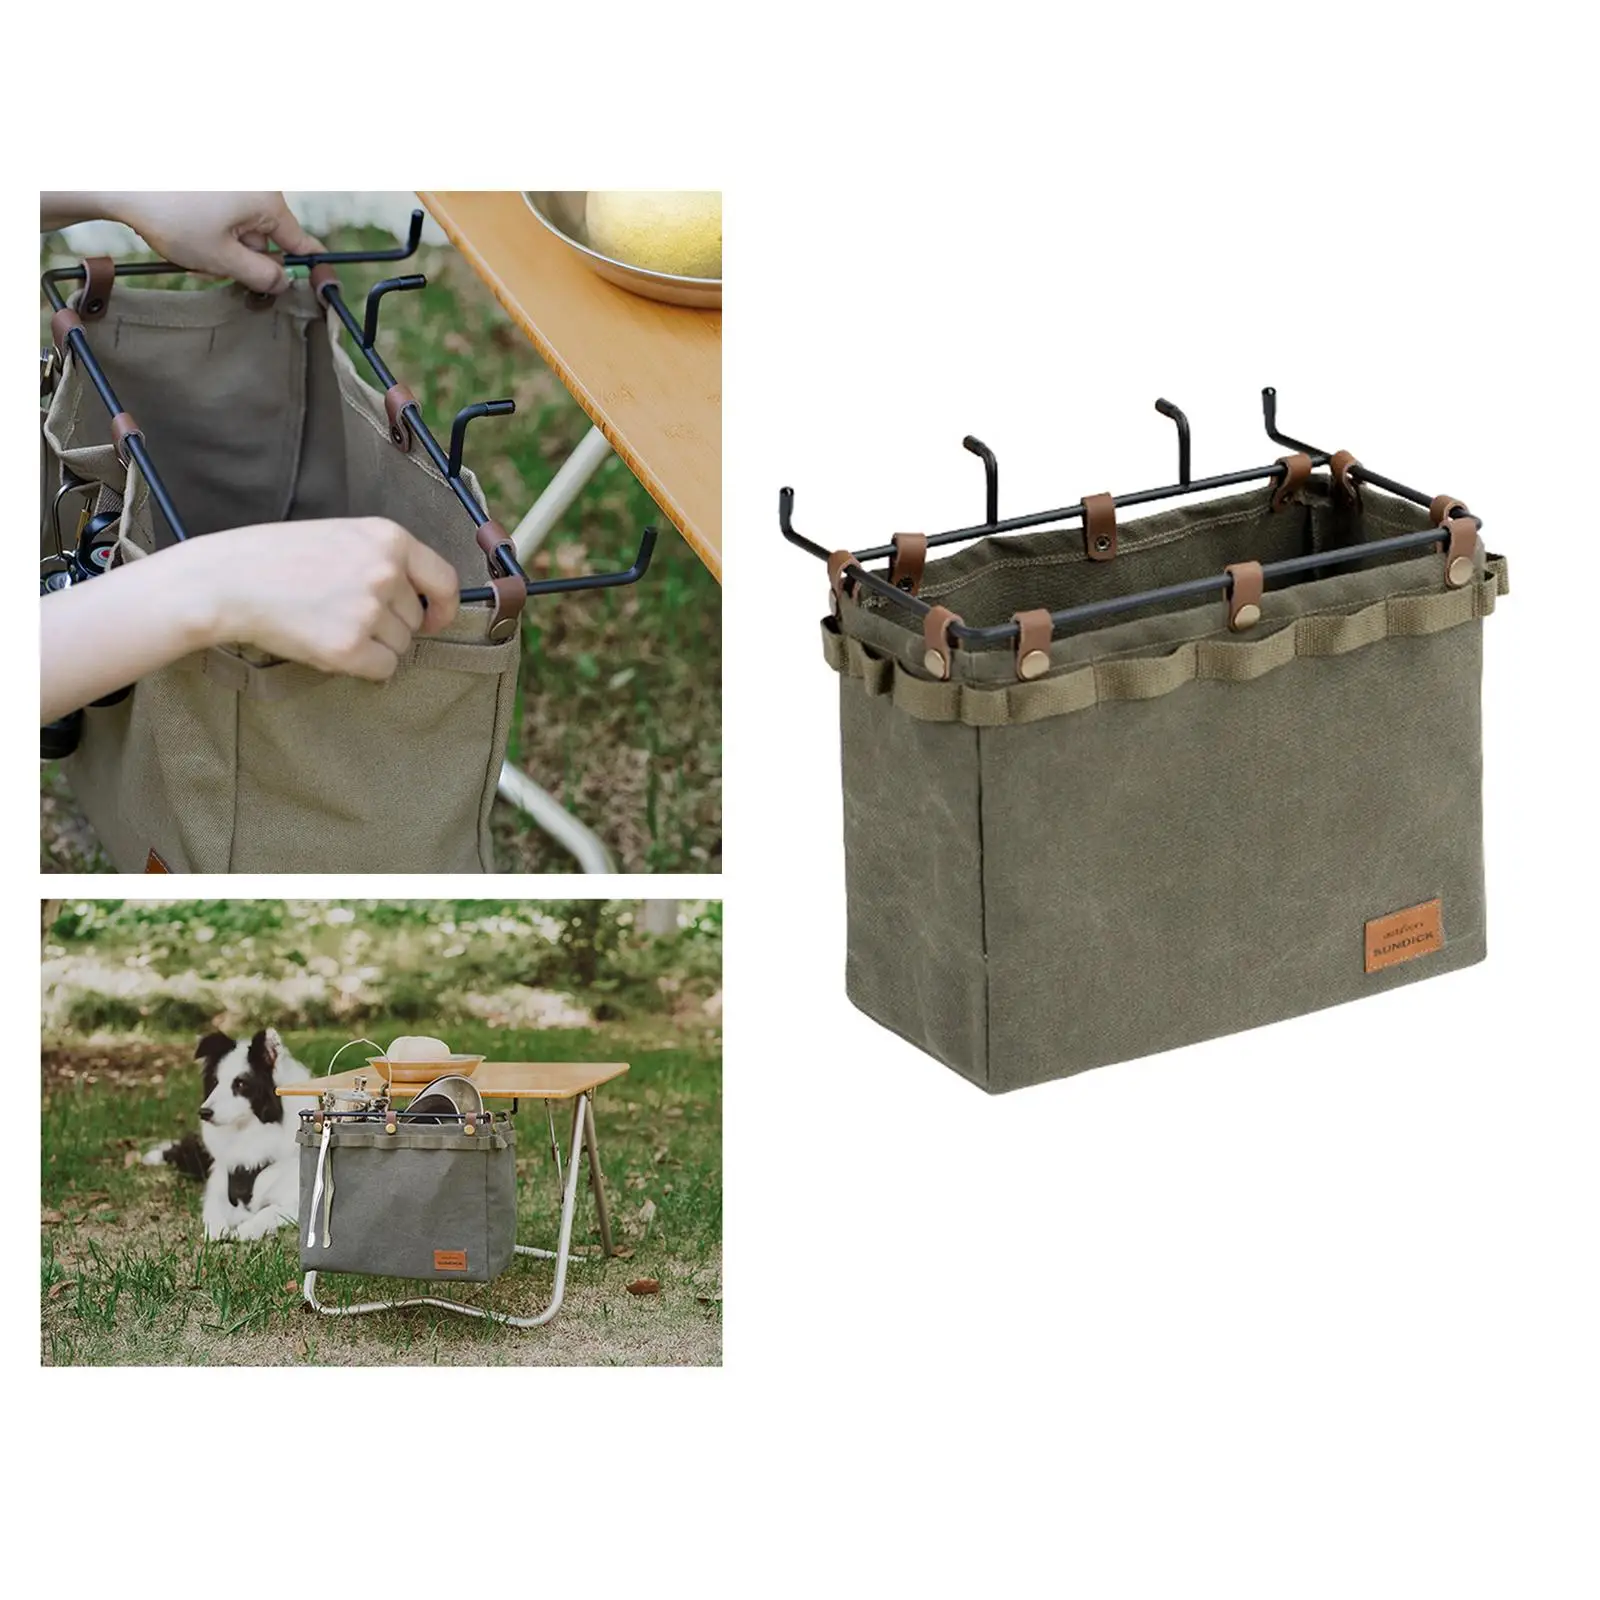 Camping Storage Bag Hanging Side Bag Holder for Outdoor BBQ Grill Tool Table